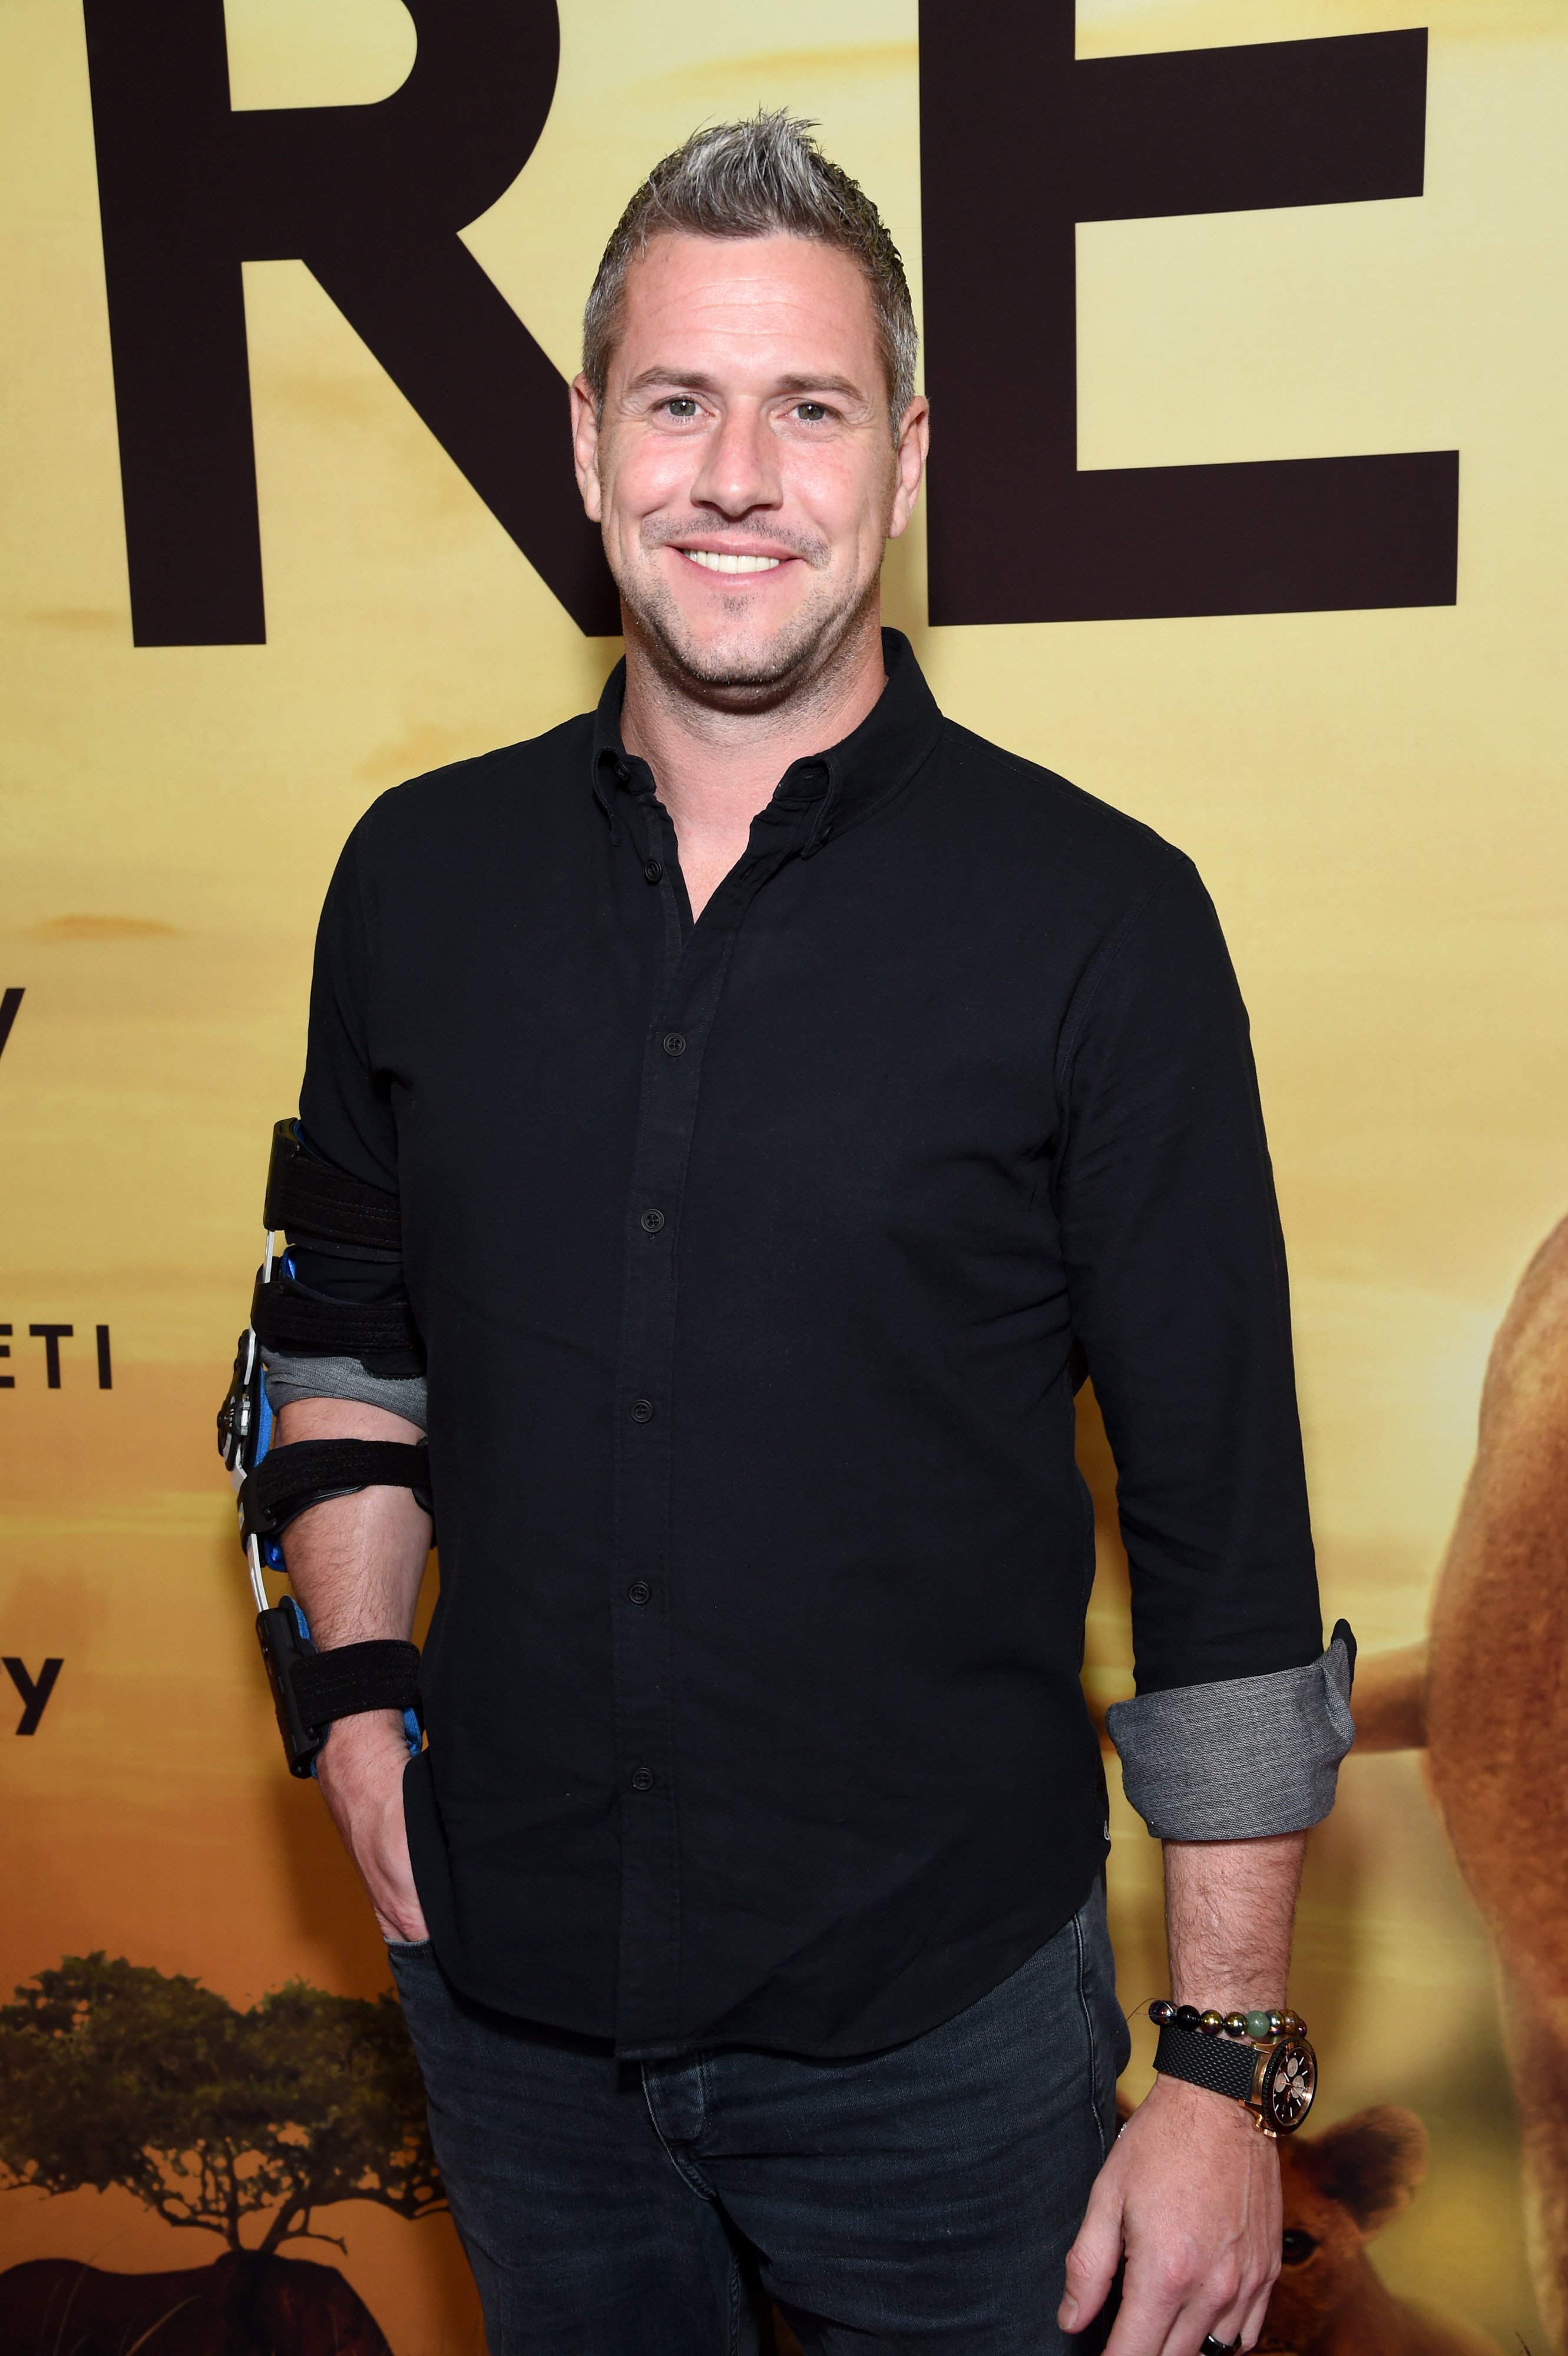 Ant Anstead attends Discovery's "Serengeti" premiere at Wallis Annenberg Center for the Performing Arts on July 23, 2019 | Photo: Getty Images